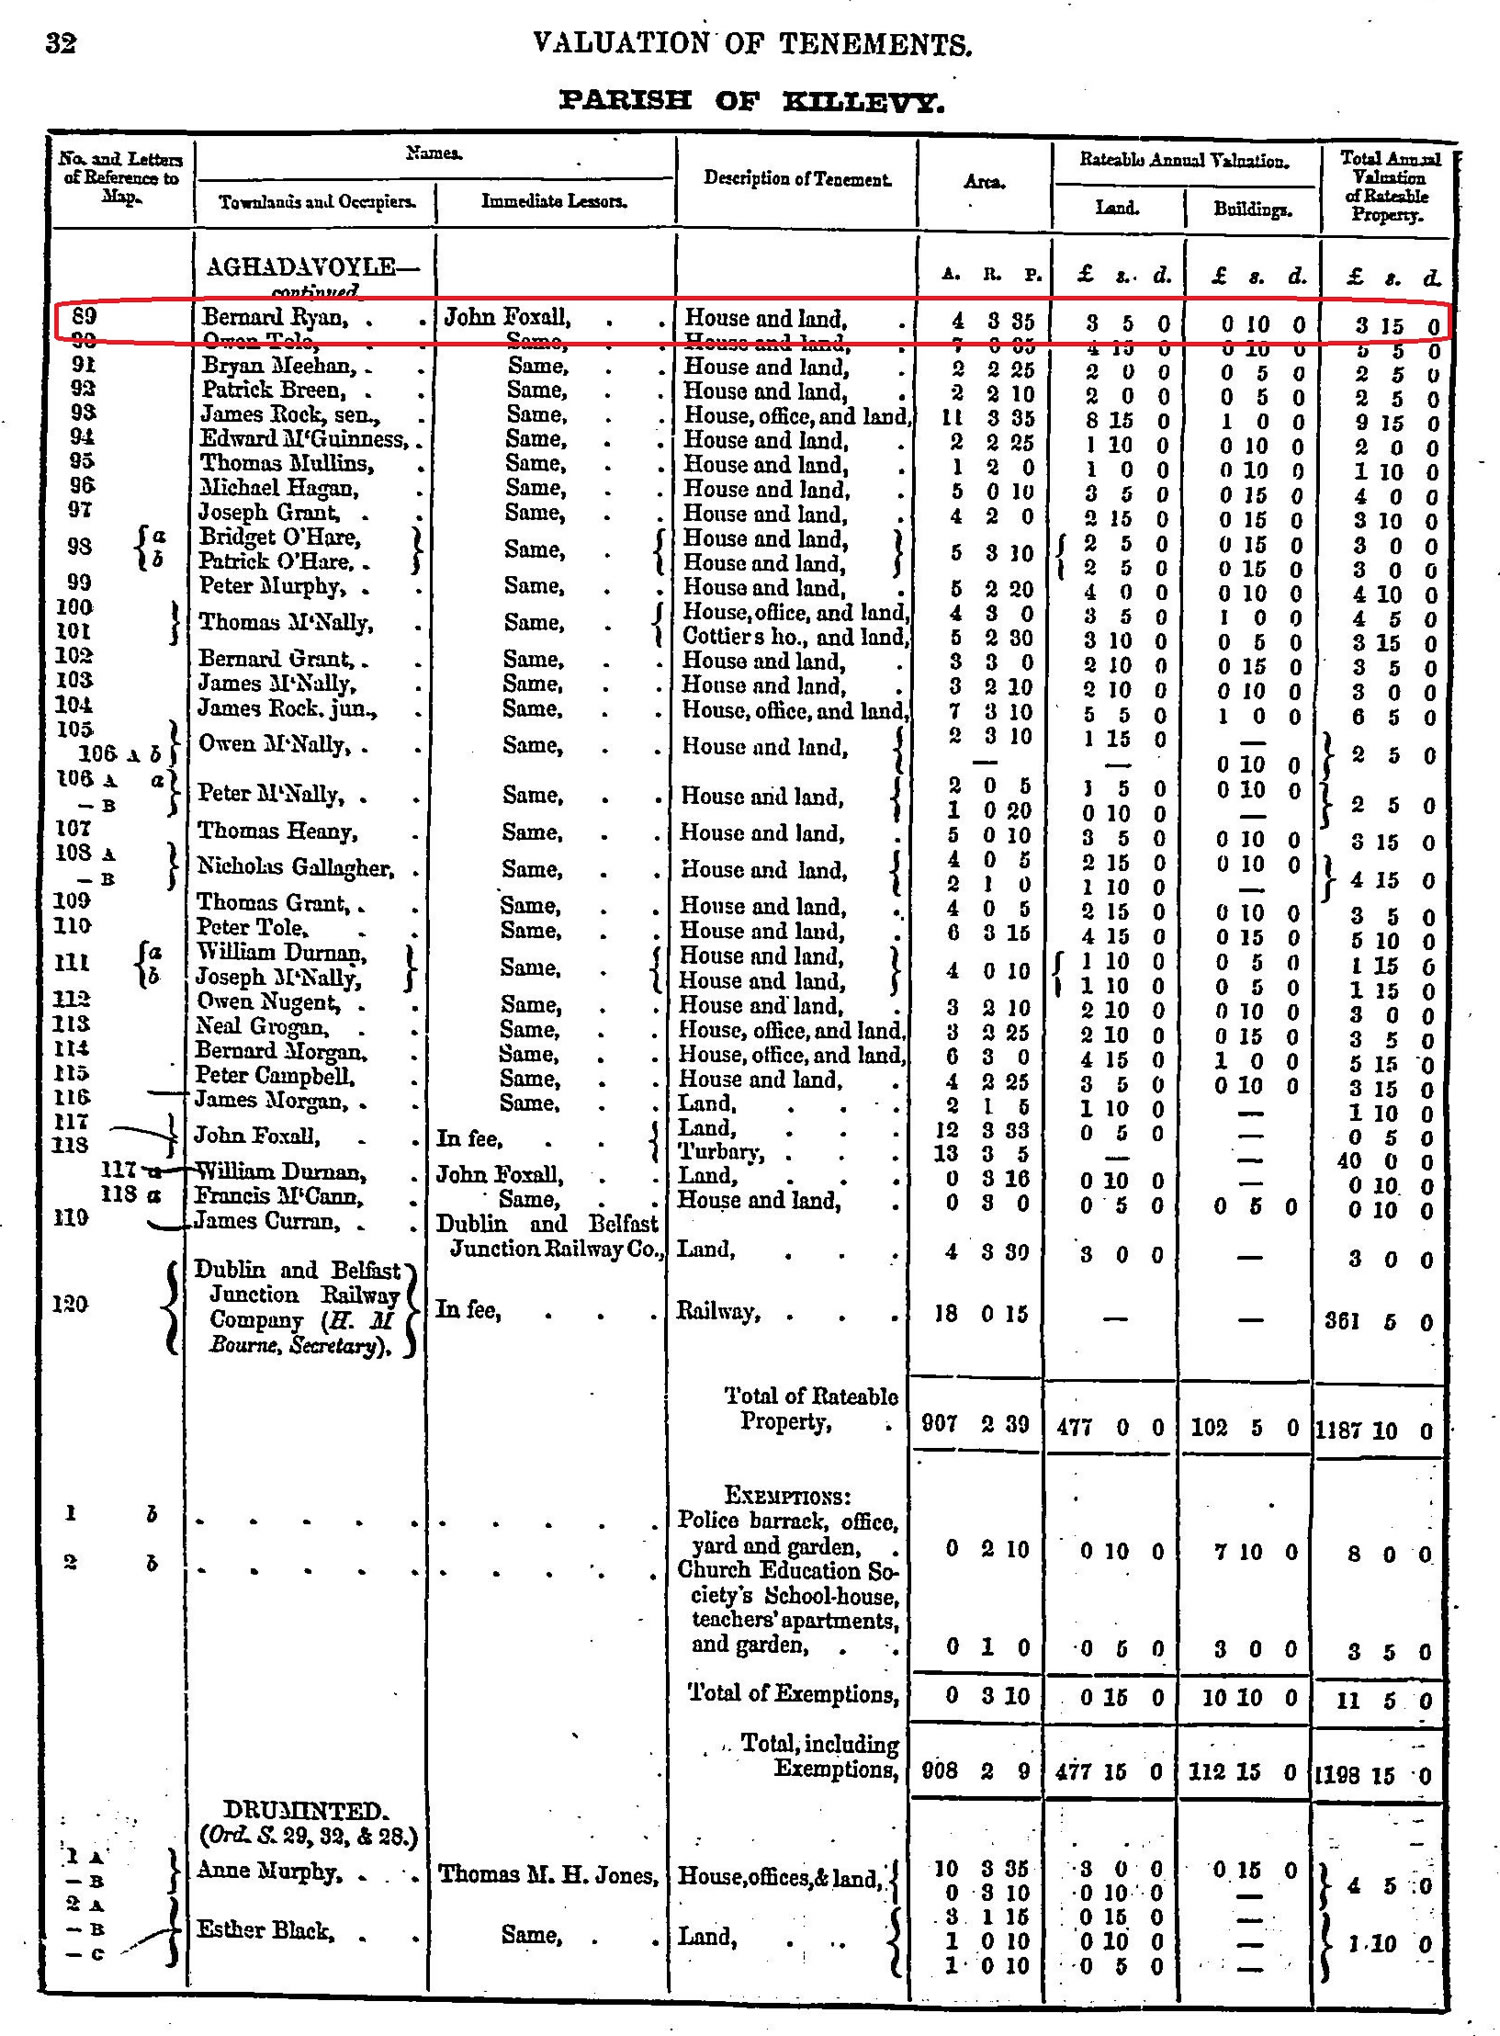 Valuation of Tenements from the Griffith's Valuation of Ireland 1864 on TheGenealogist